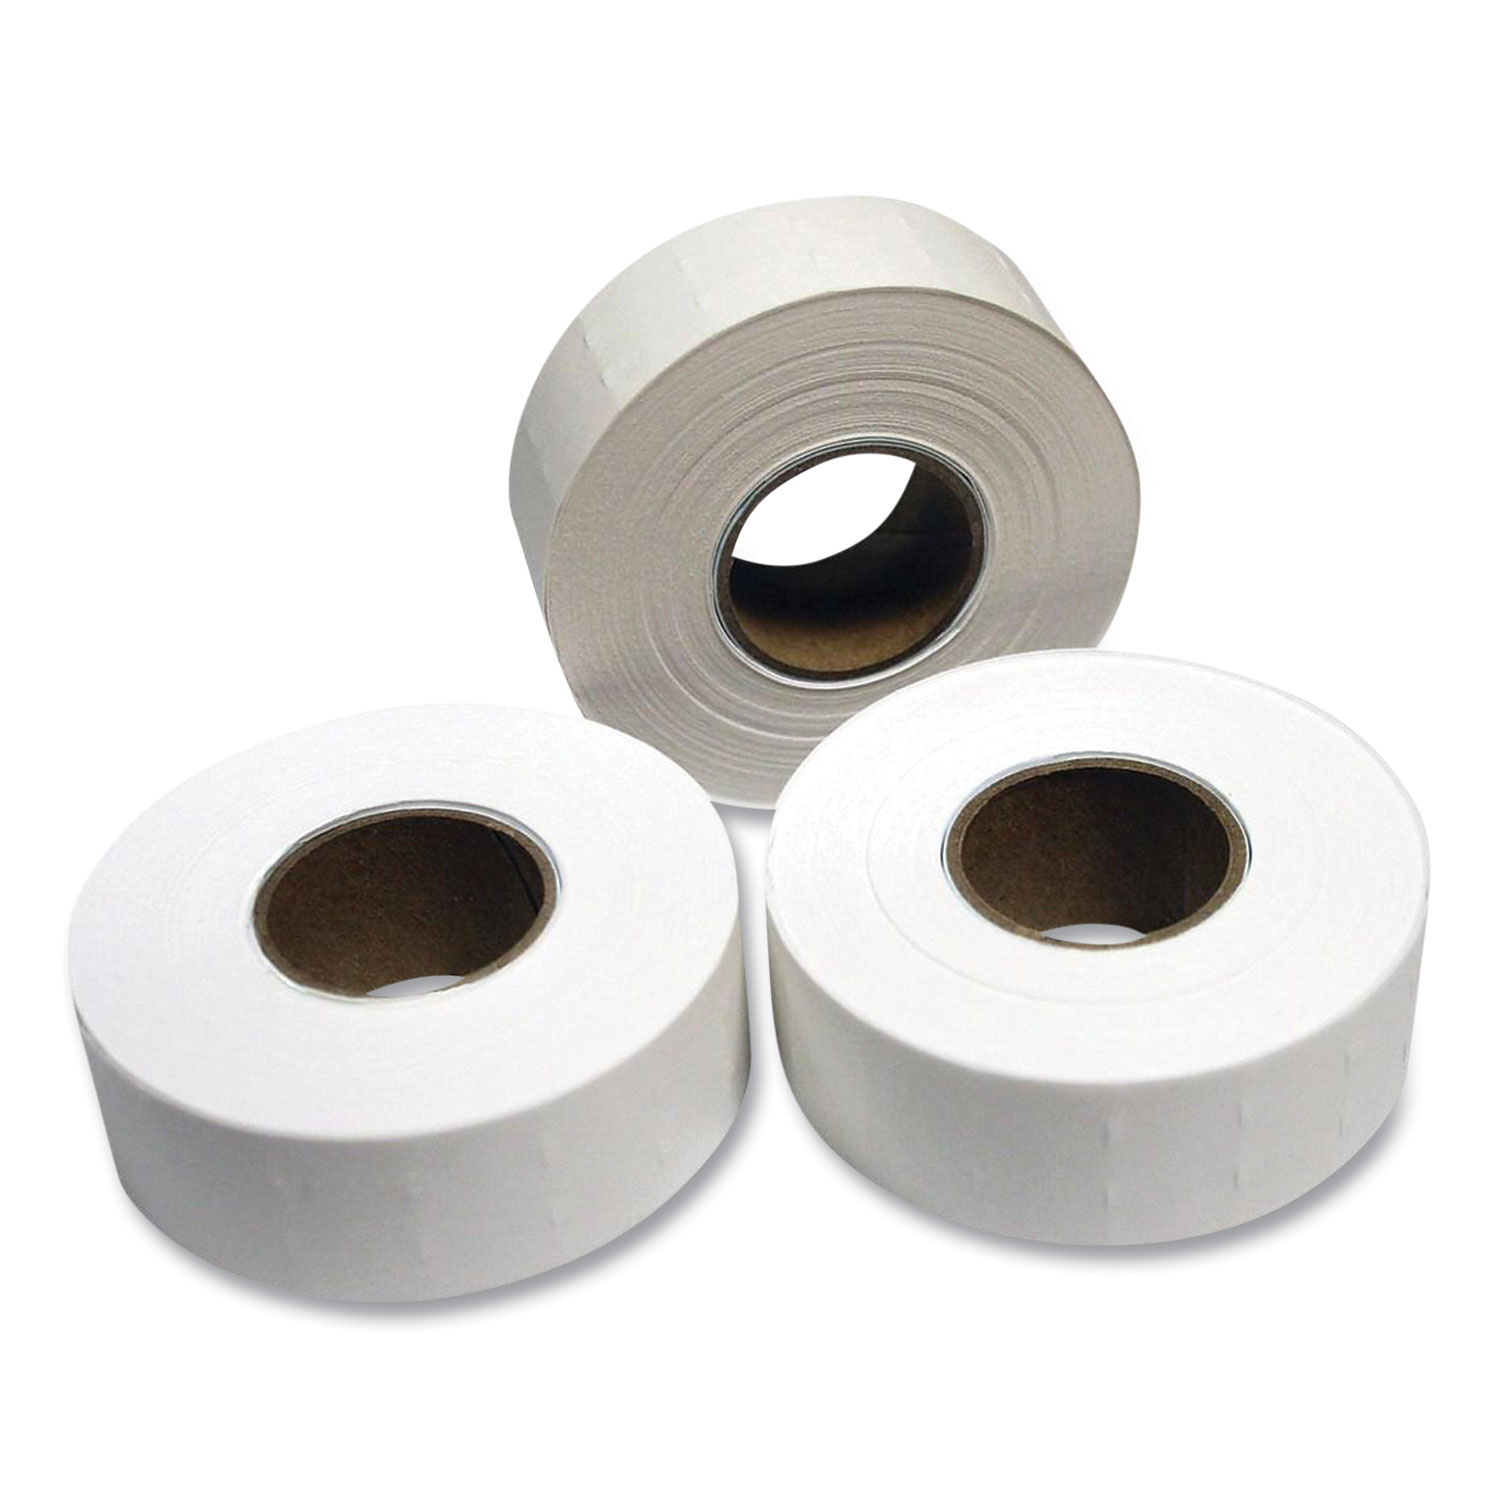  Monarch 925125 One-Line Labels for Garvey 22-8, 0.81 x 0.44, White, 1,200/Roll, 3 Rolls/Pack (MNK826331) 